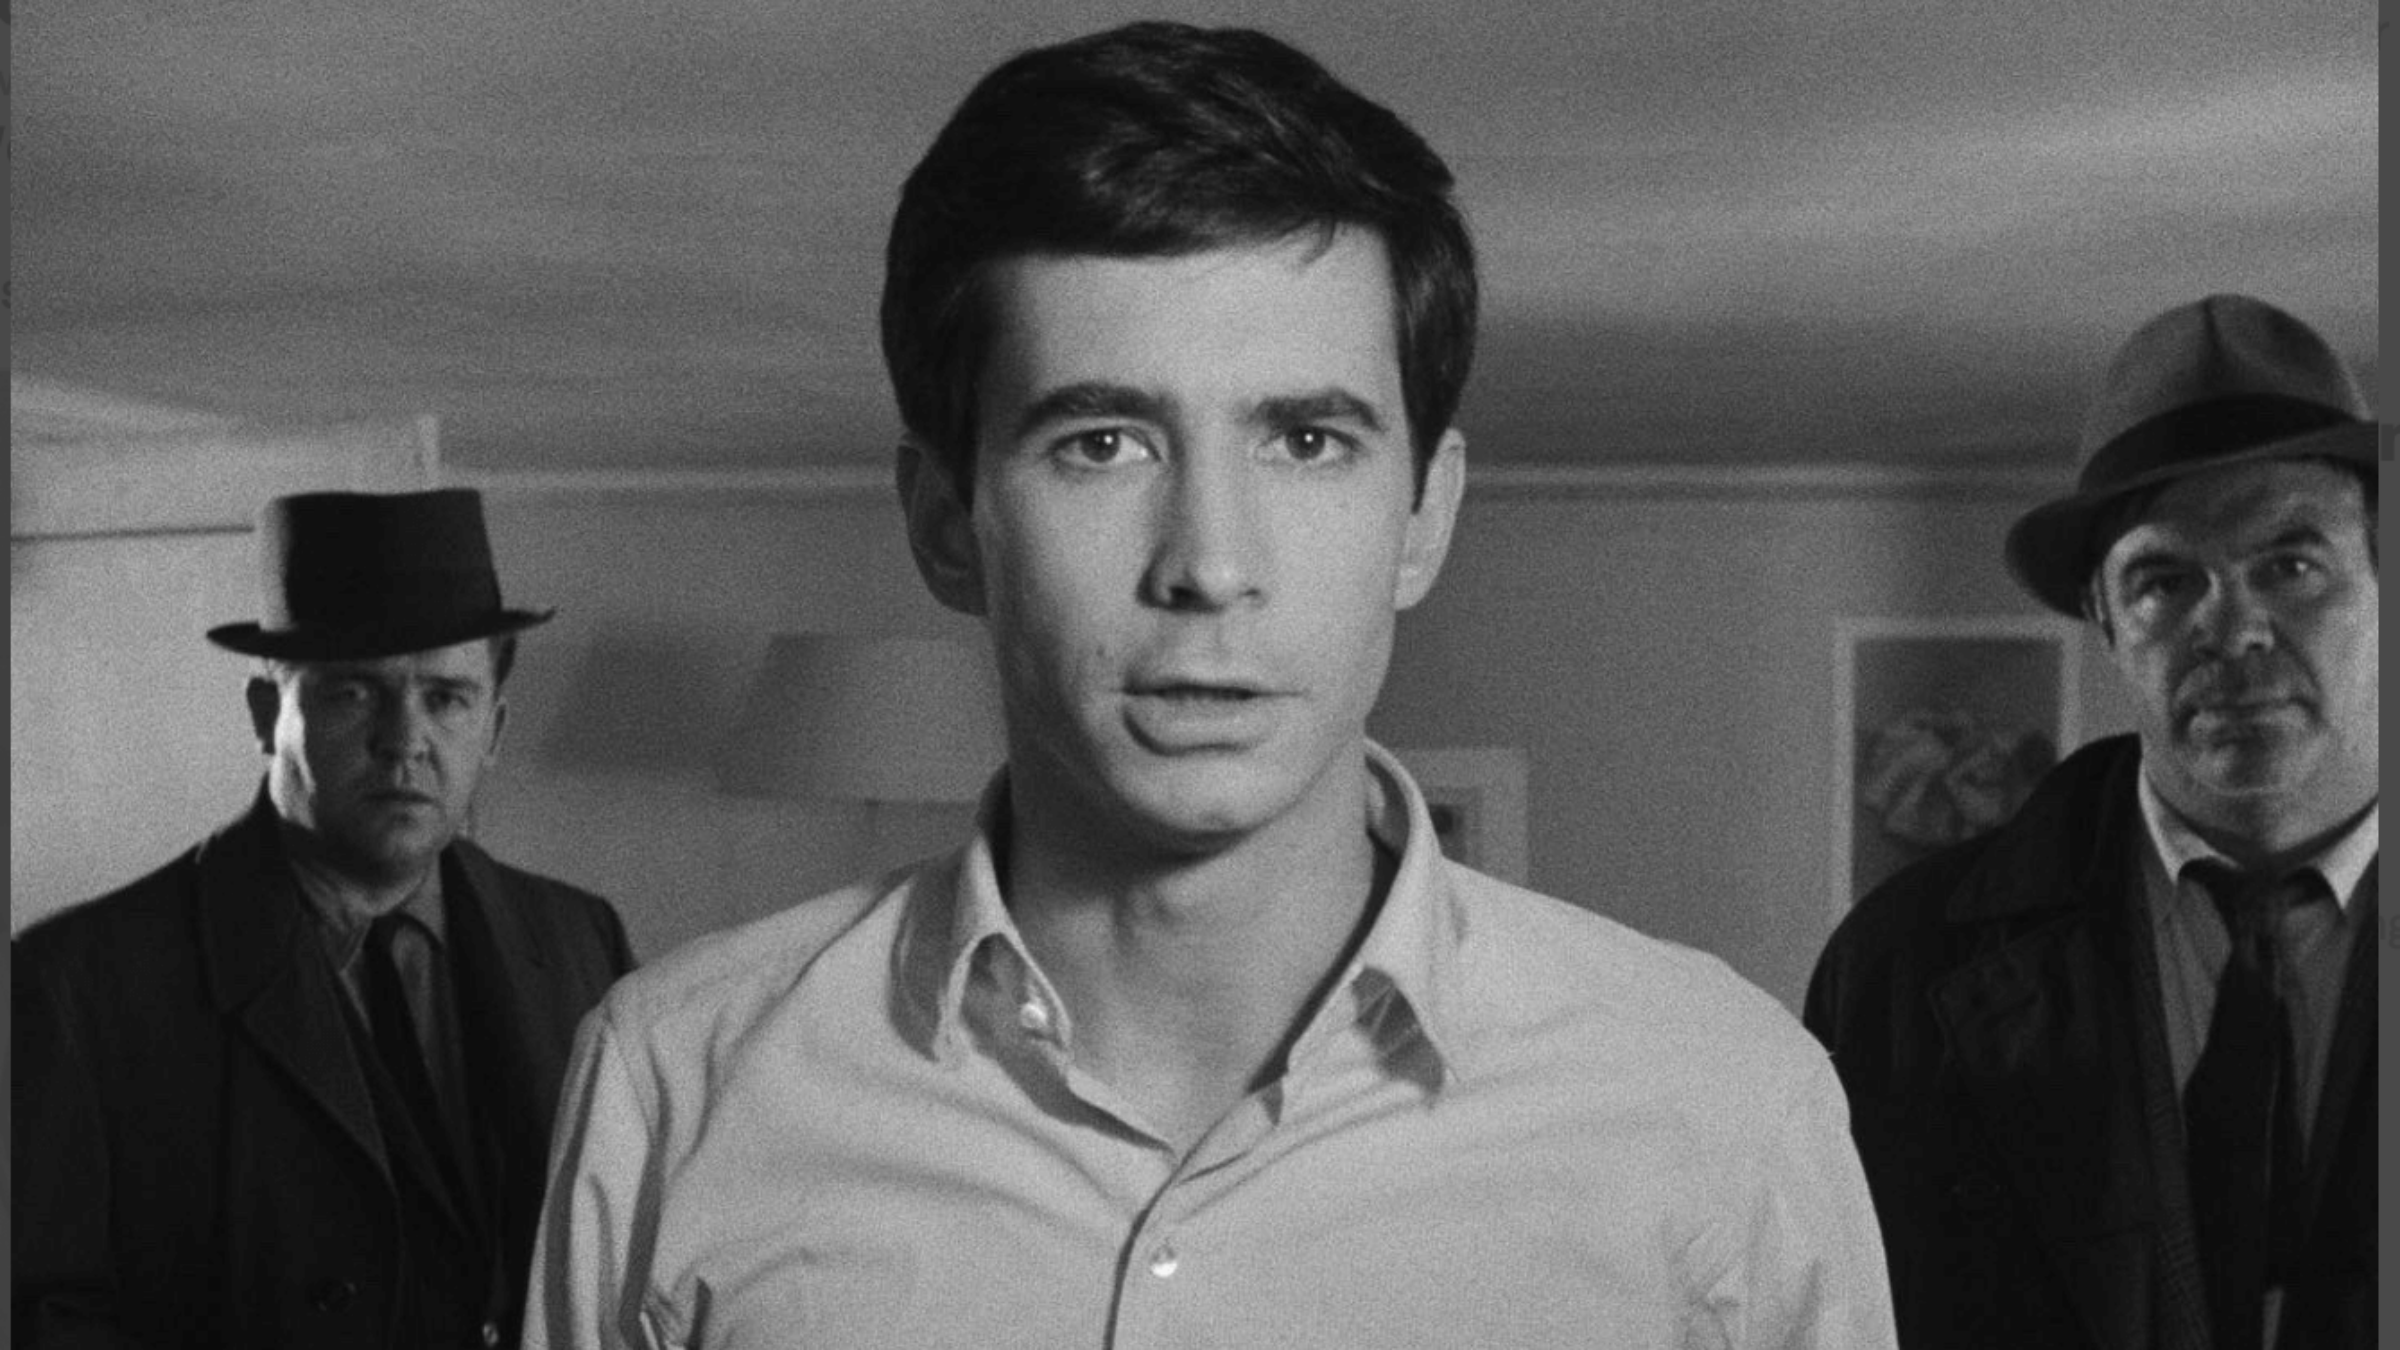 Two years after <i>Psycho,</i> Anthony Perkins starred in Orson Welles' <i>The Trial</i>.